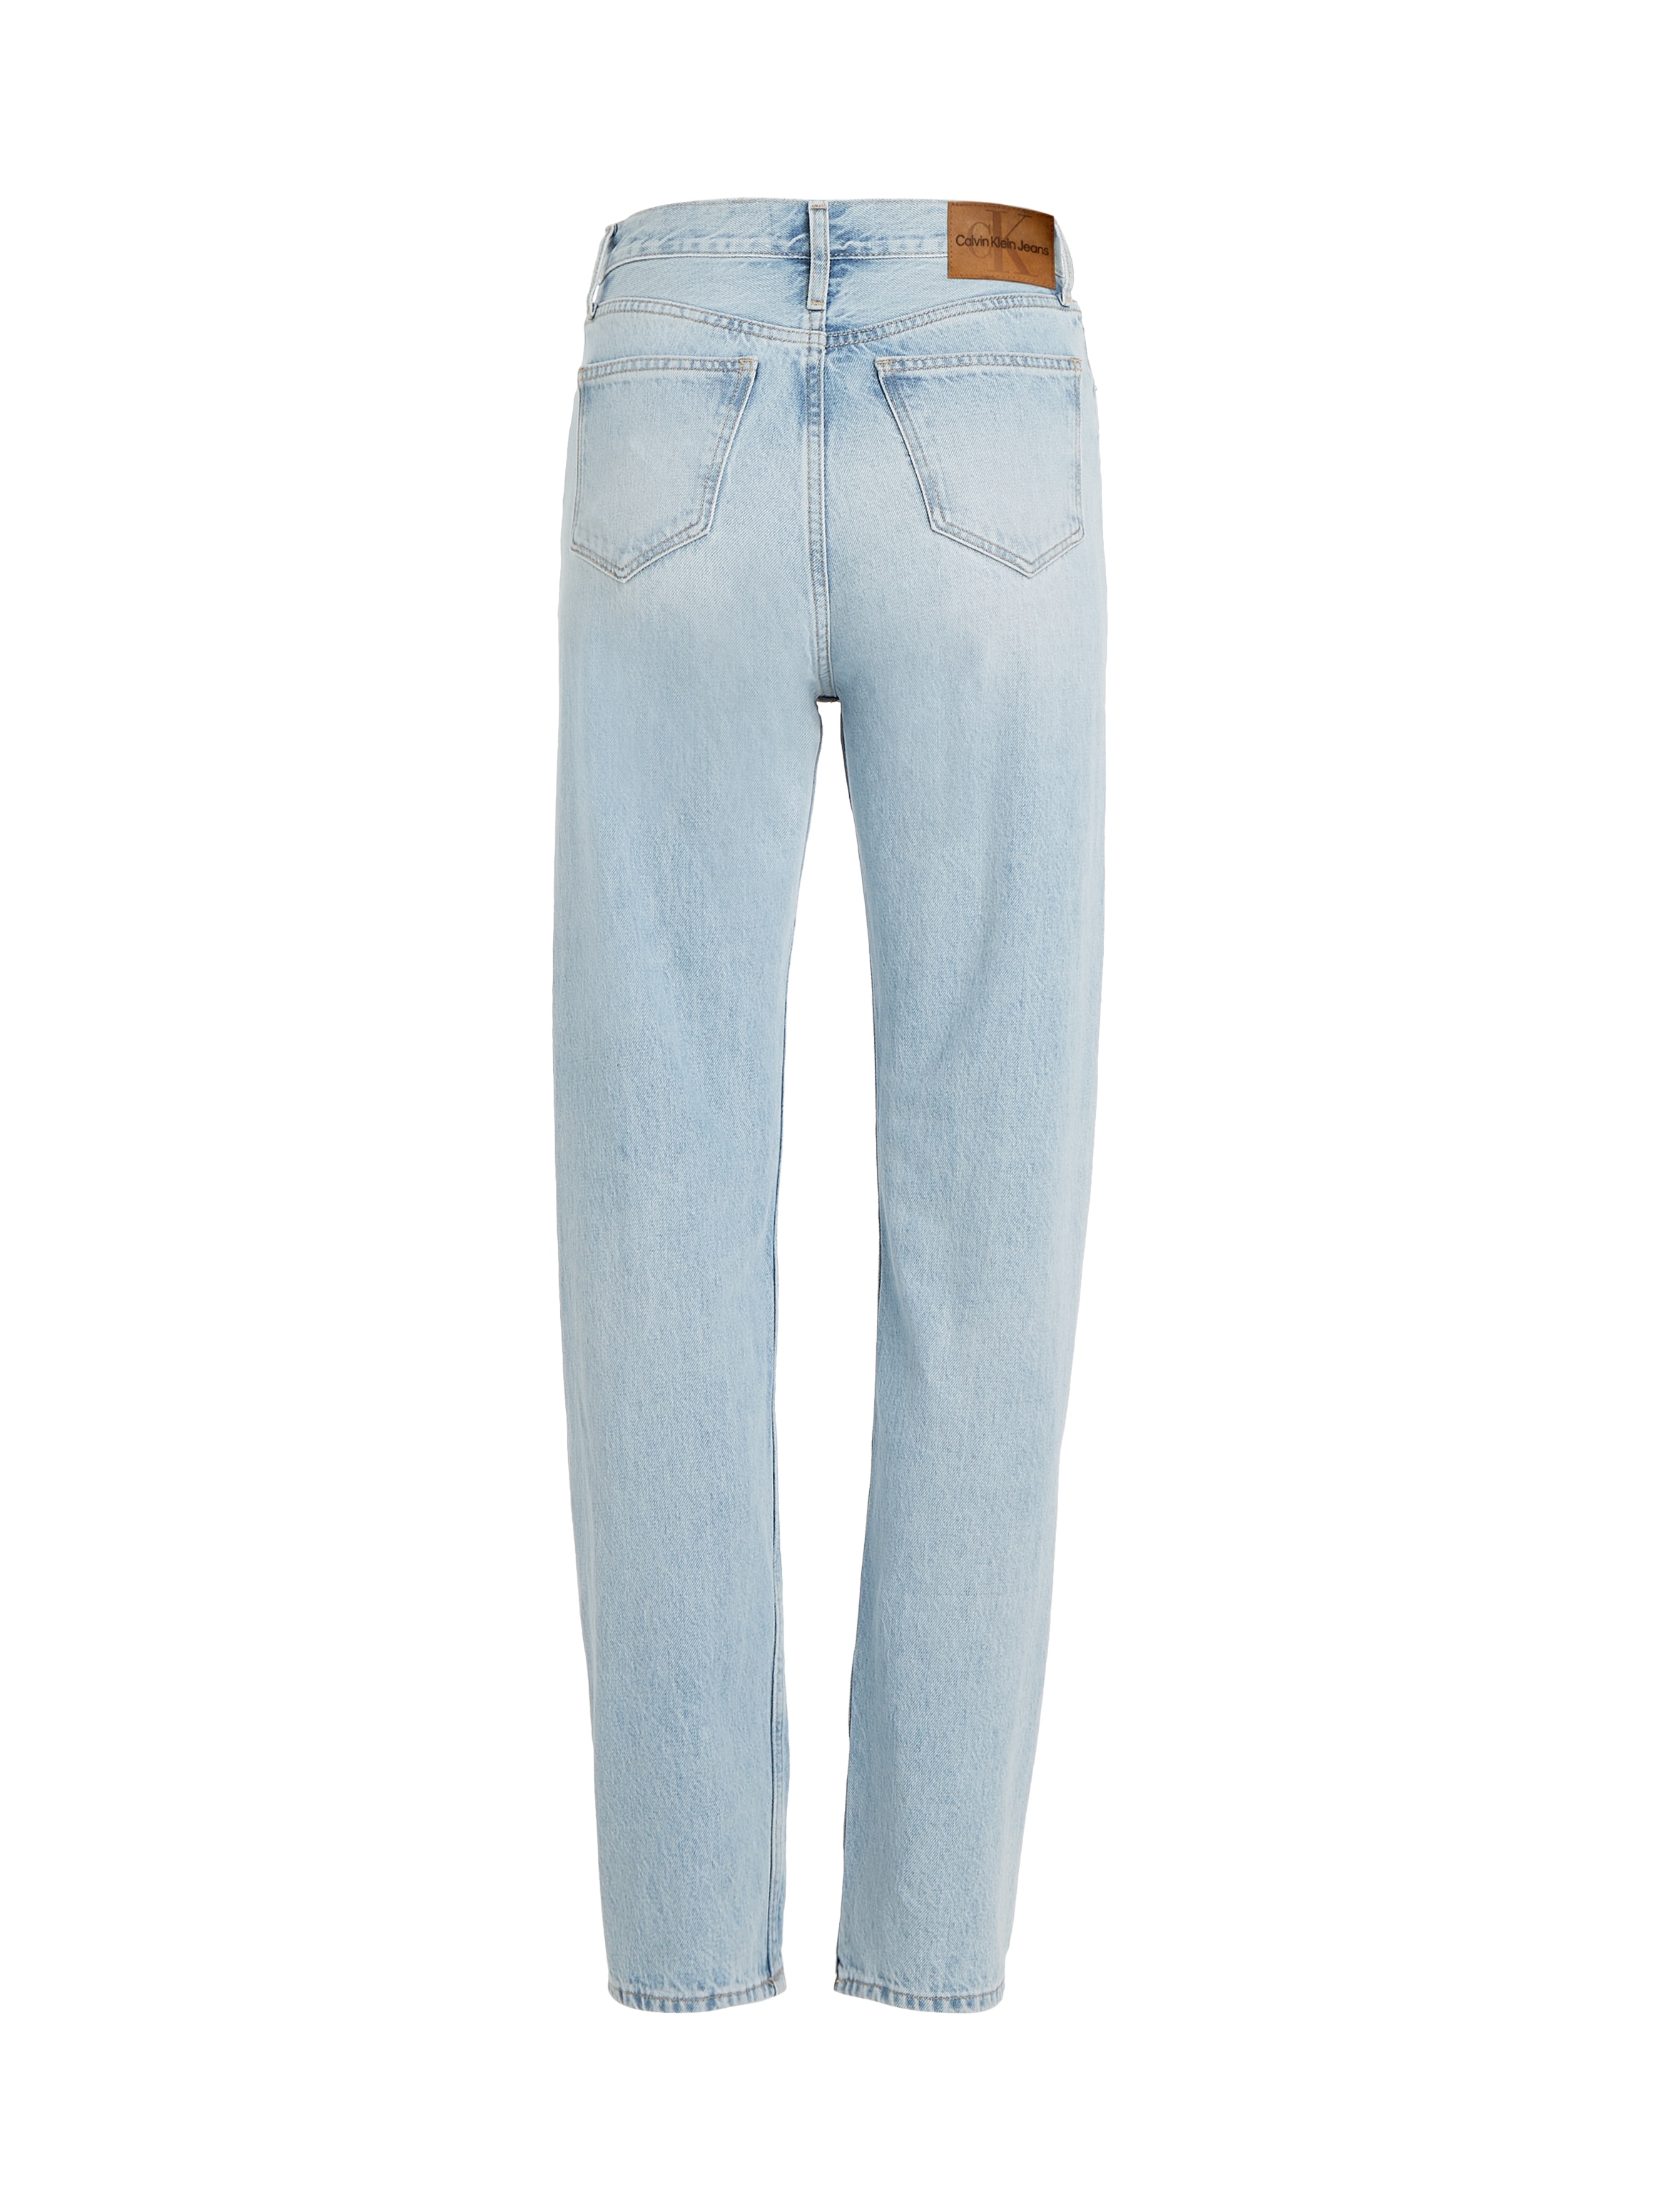 »HIGH Jeans im RISE Klein 5-Pocket-Style Straight-Jeans STRAIGHT«, Calvin ♕ bei